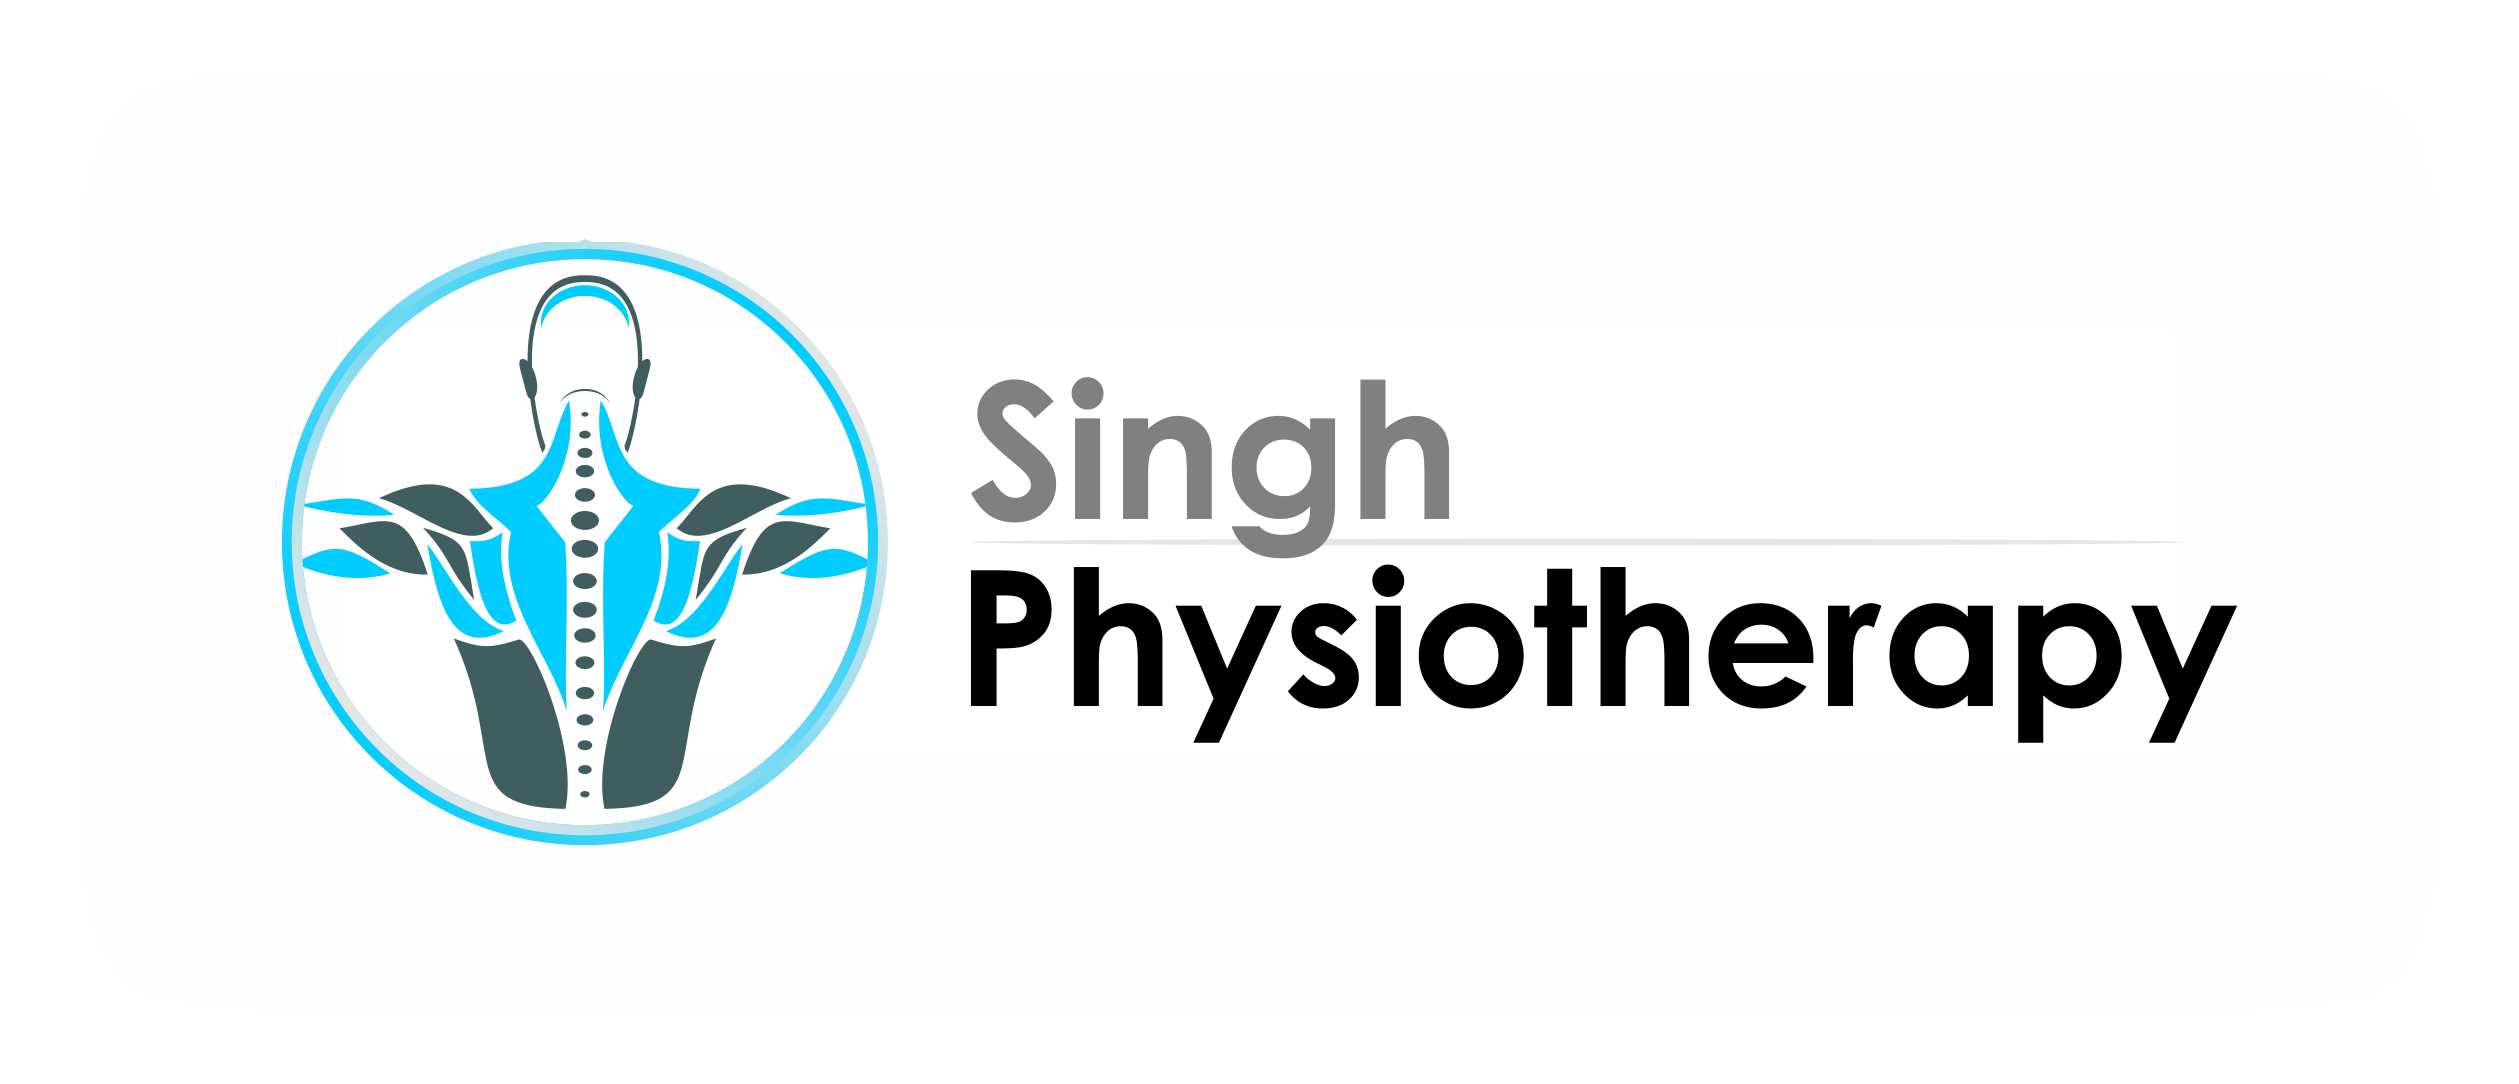 Singh Physiotherapy - Logo